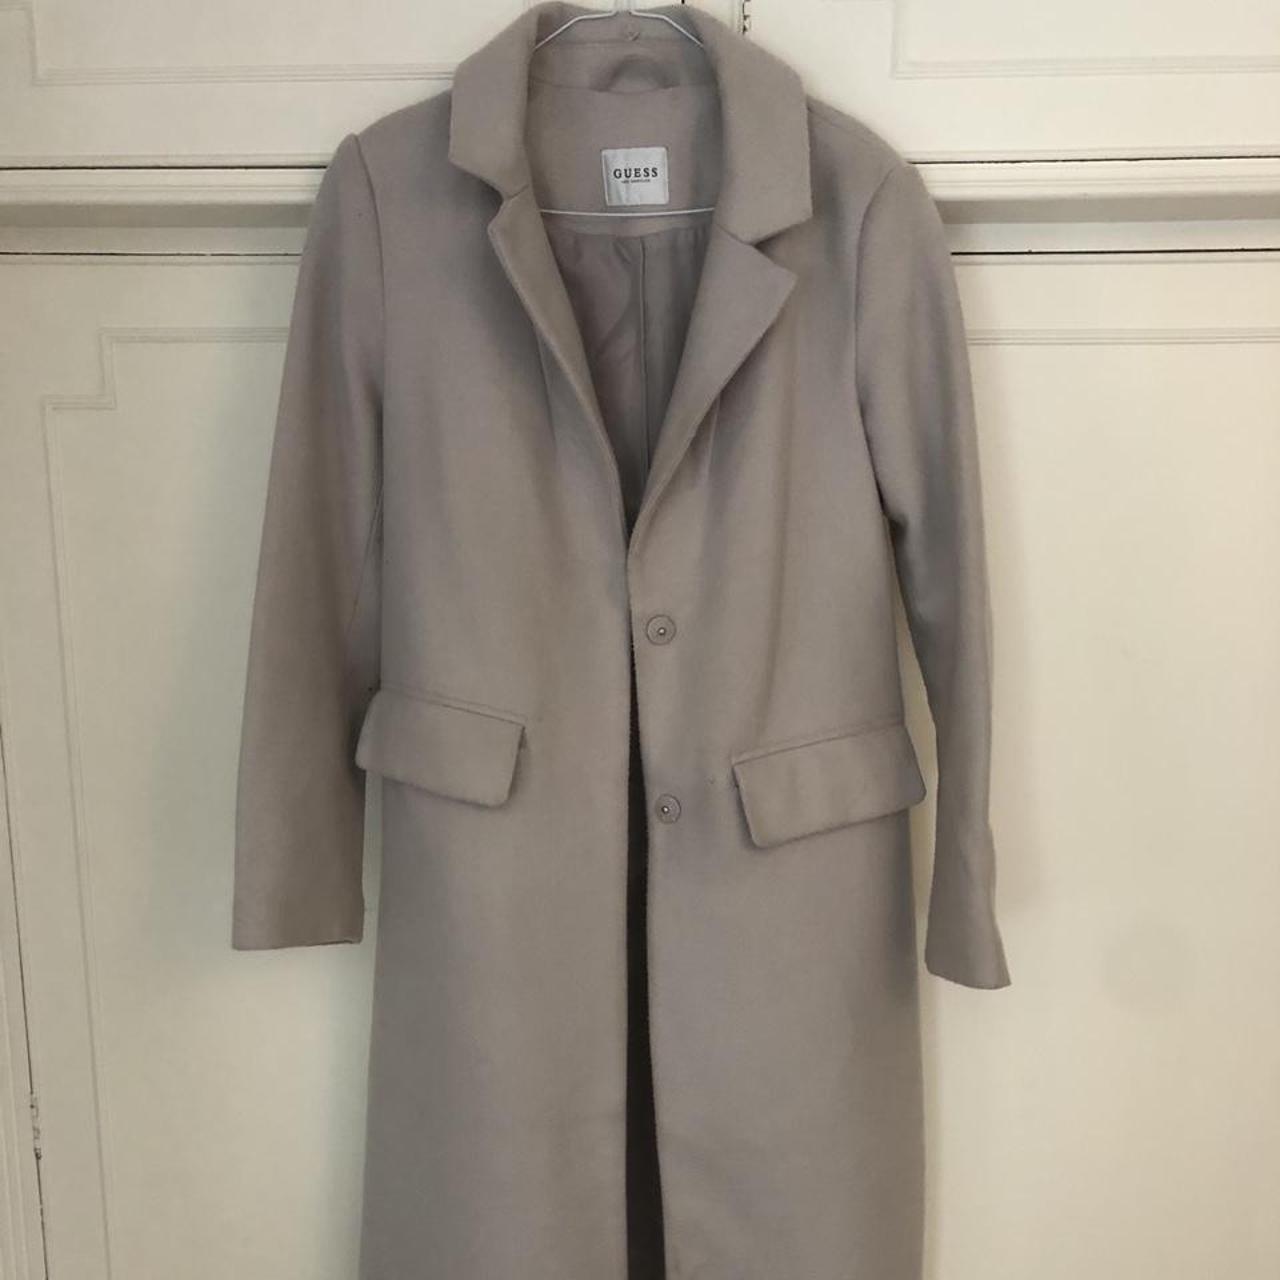 Amazing long authentic GUESS coat bought in Russia!... - Depop